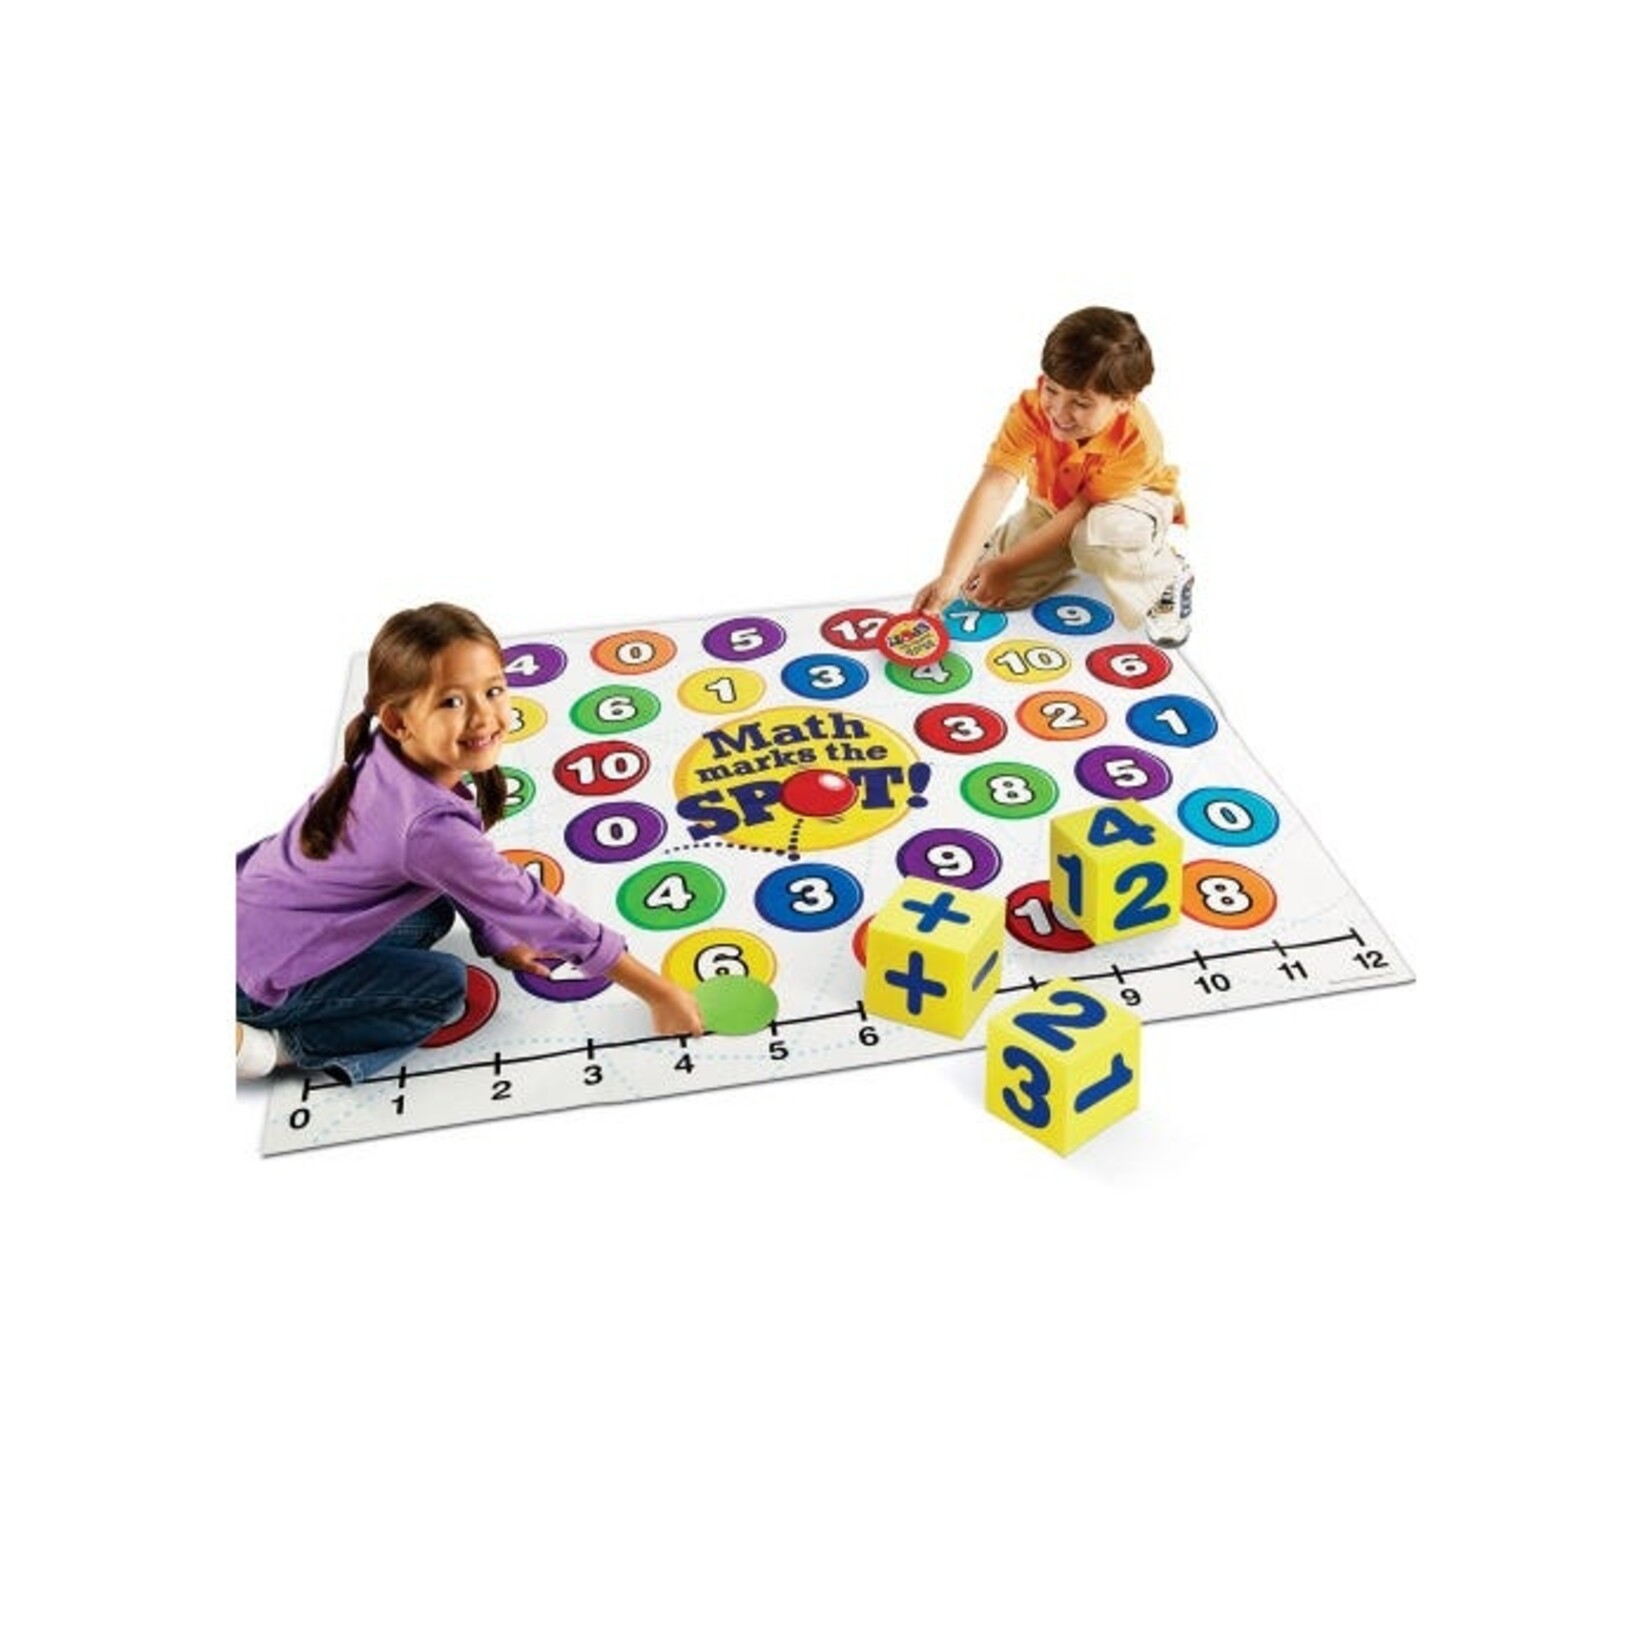 LEARNING RESOURCES INC Math Marks the Spot™ Activity Set